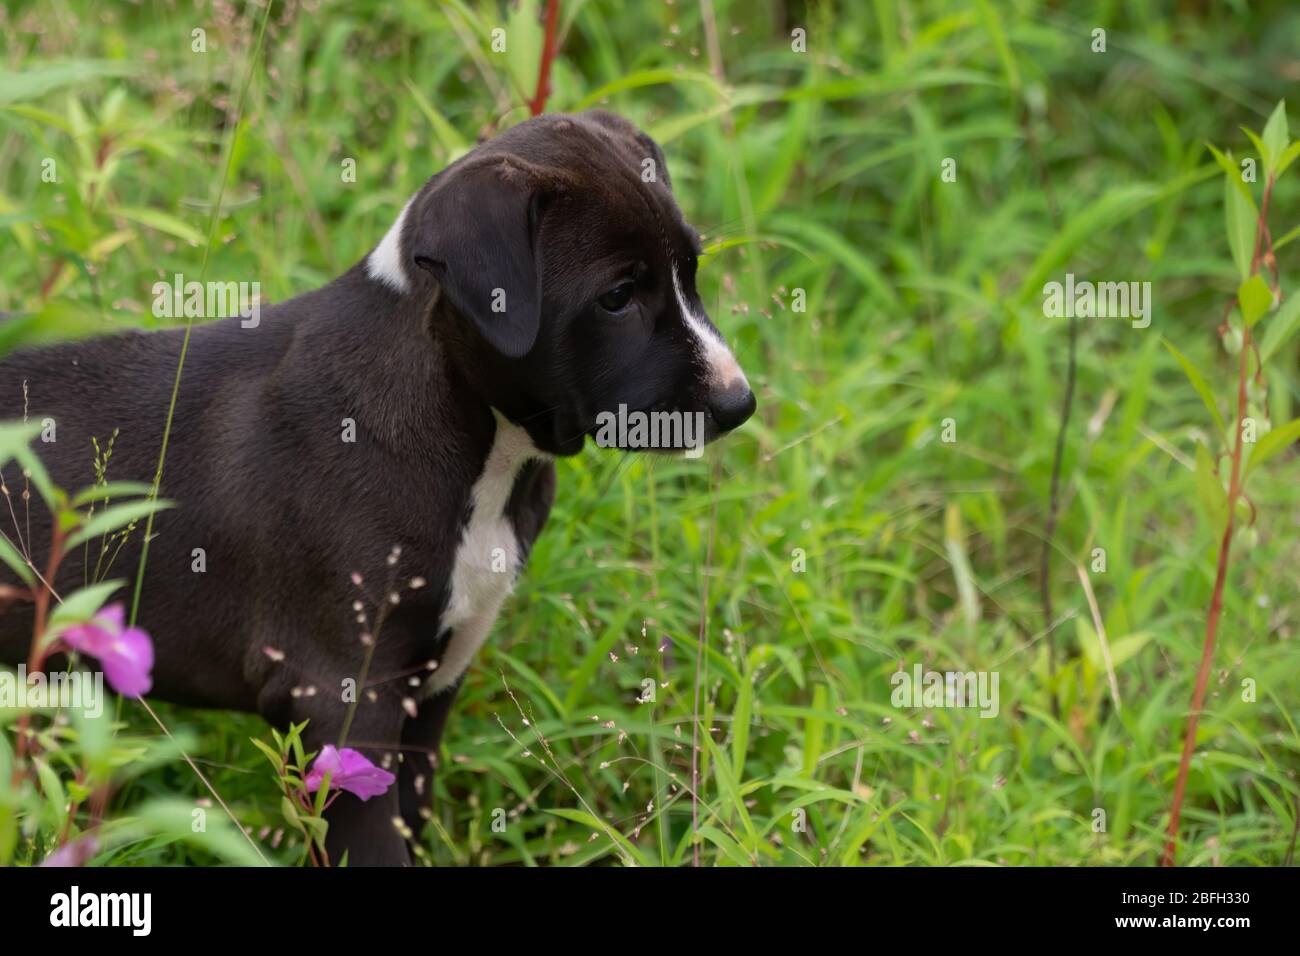 Our family pet, a black and white, playful mongrel puppy being playful in the grass in our garden. Stock Photo